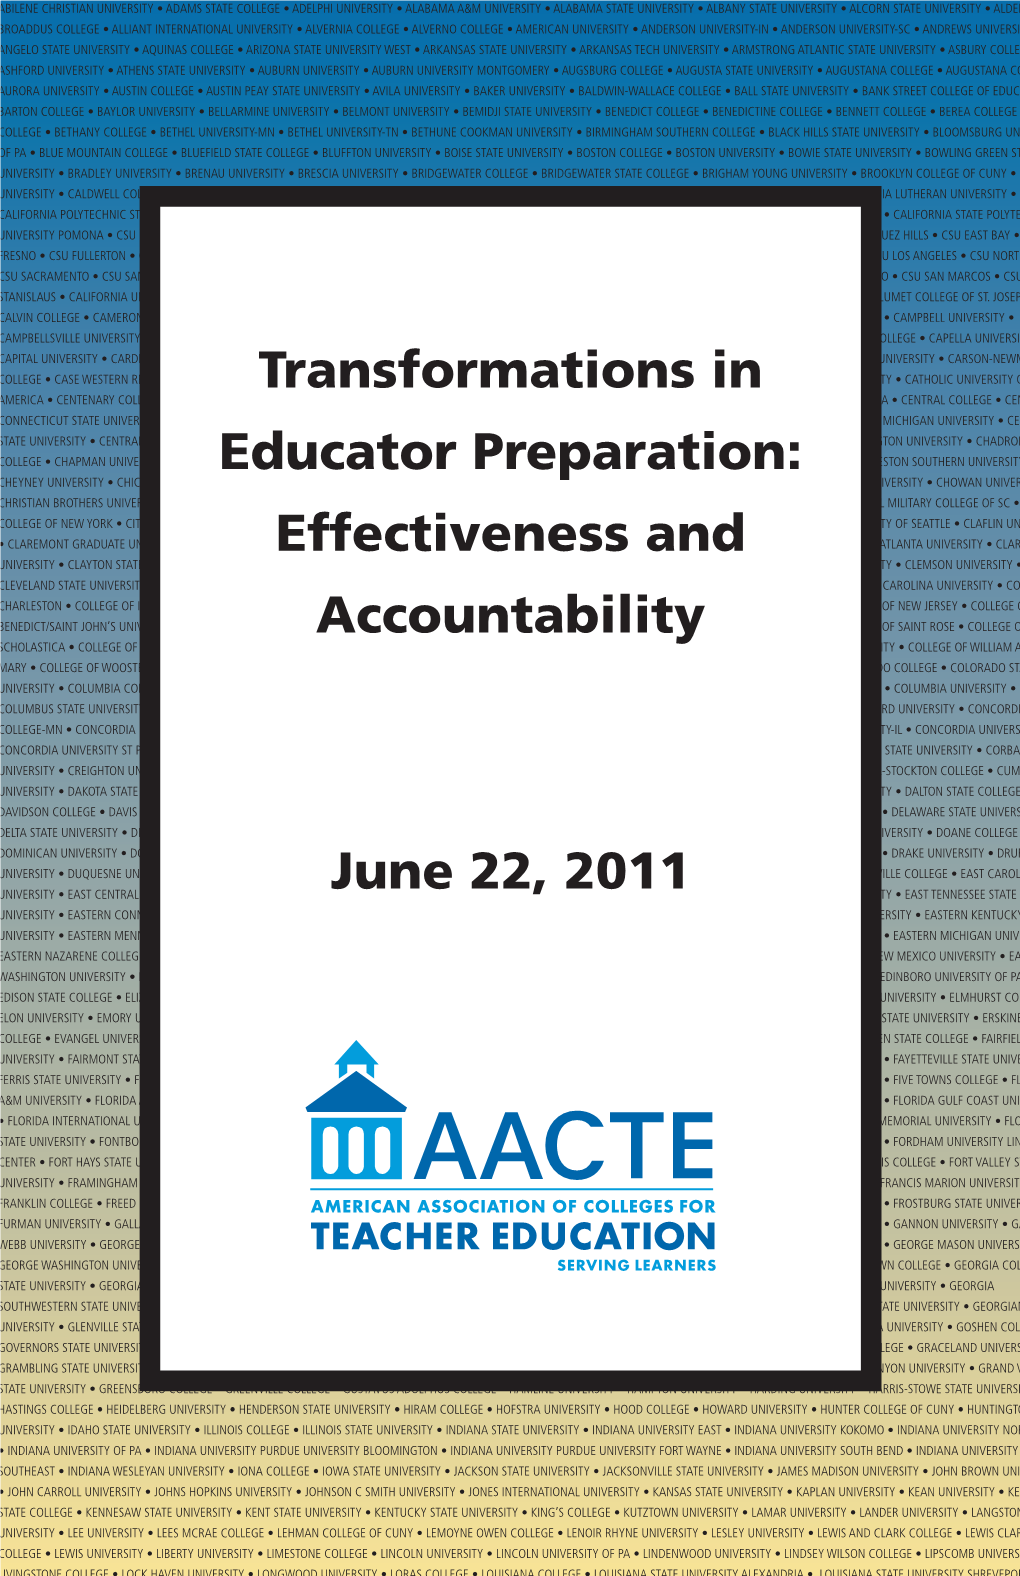 Transformations in Educator Preparation: Effectiveness and Accountability 3